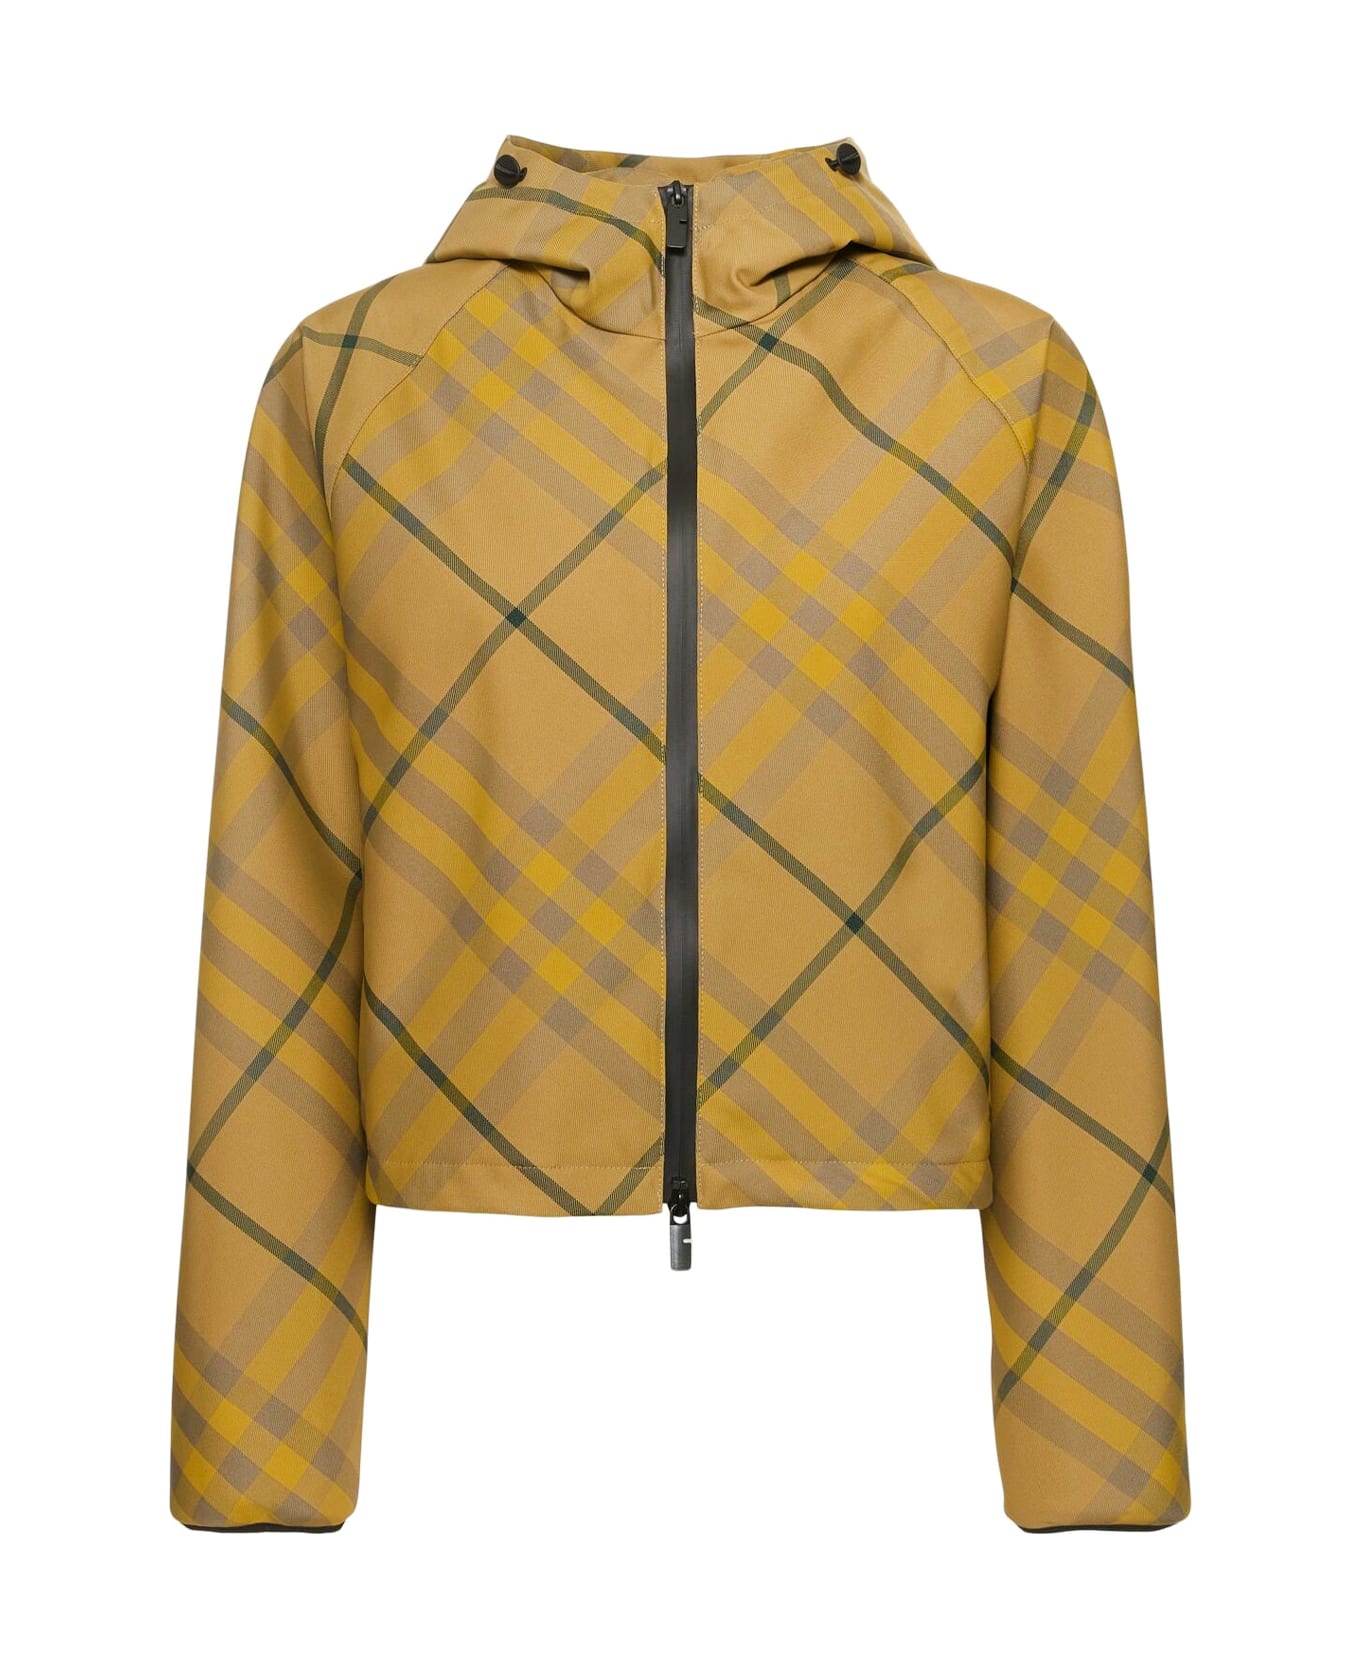 Burberry Hooded Jacket - Multicolor